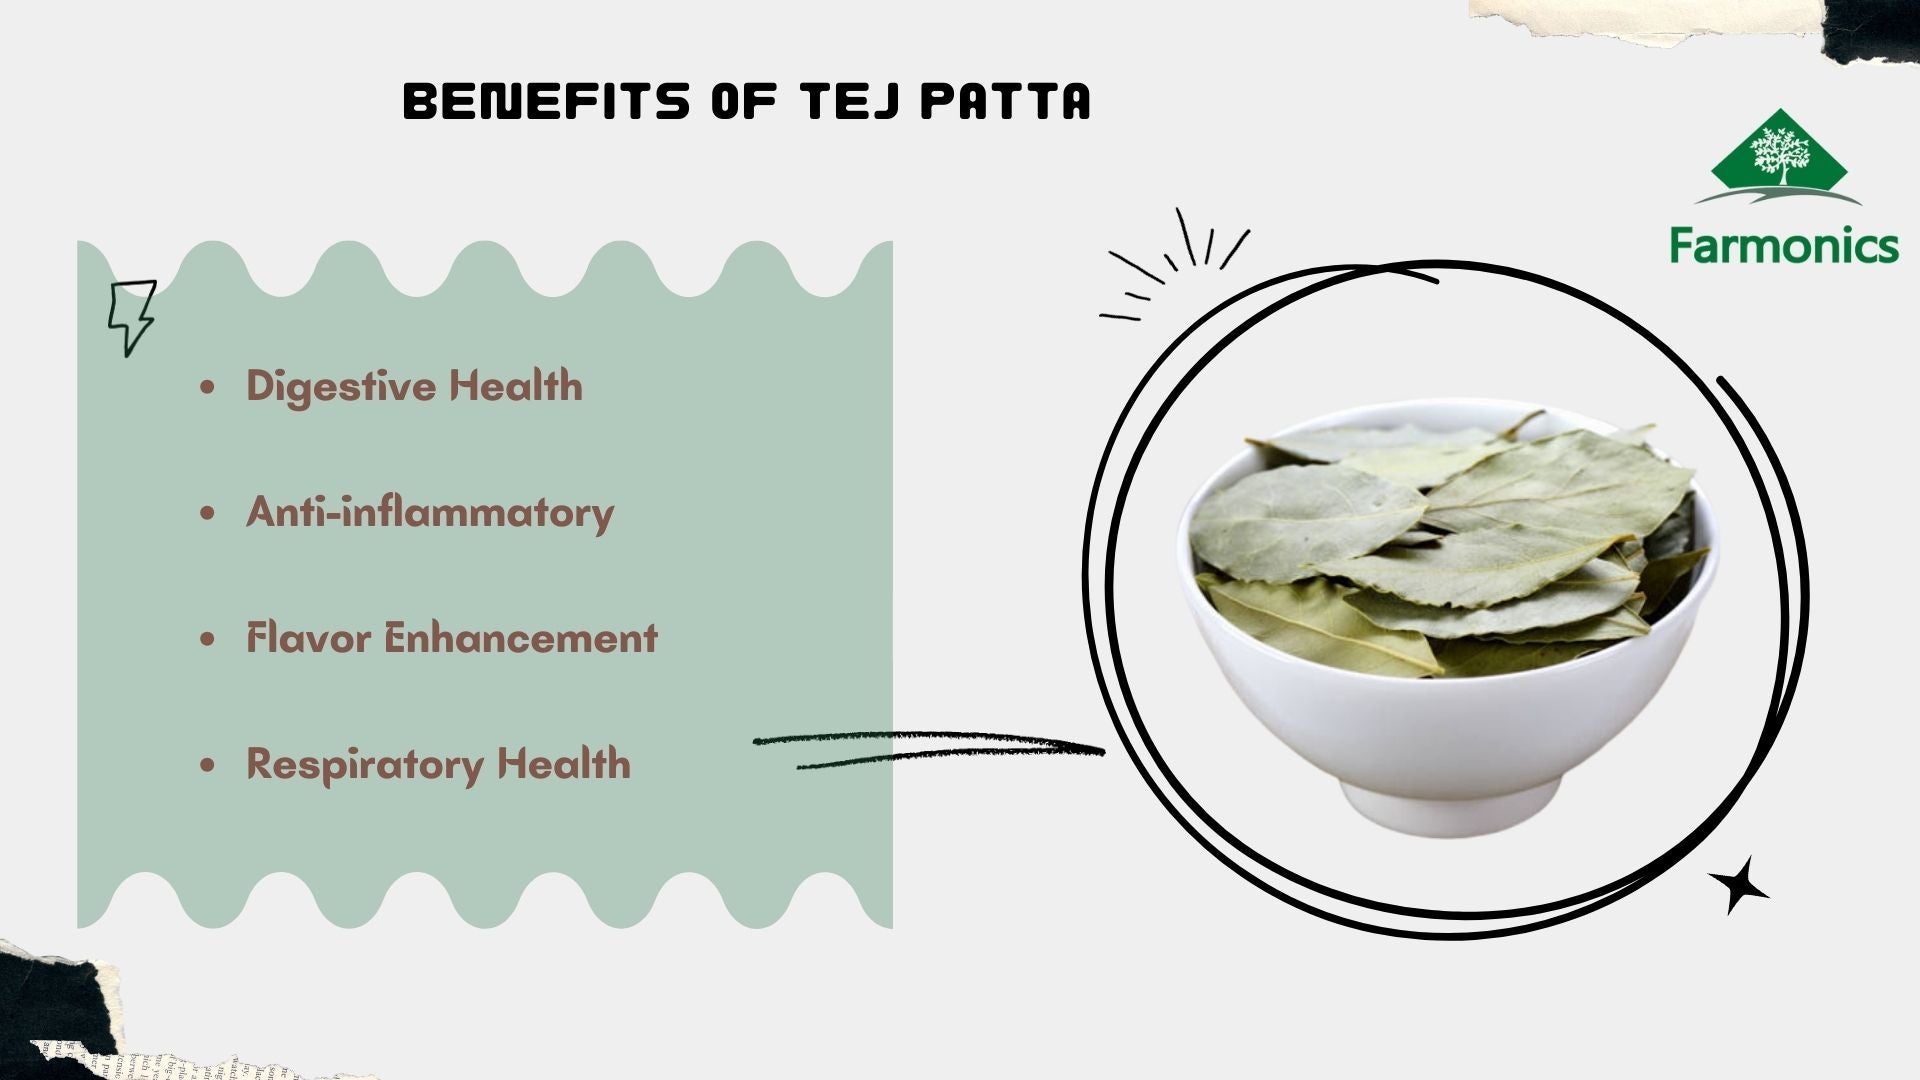 Here are some of the benefits of TEj patta 